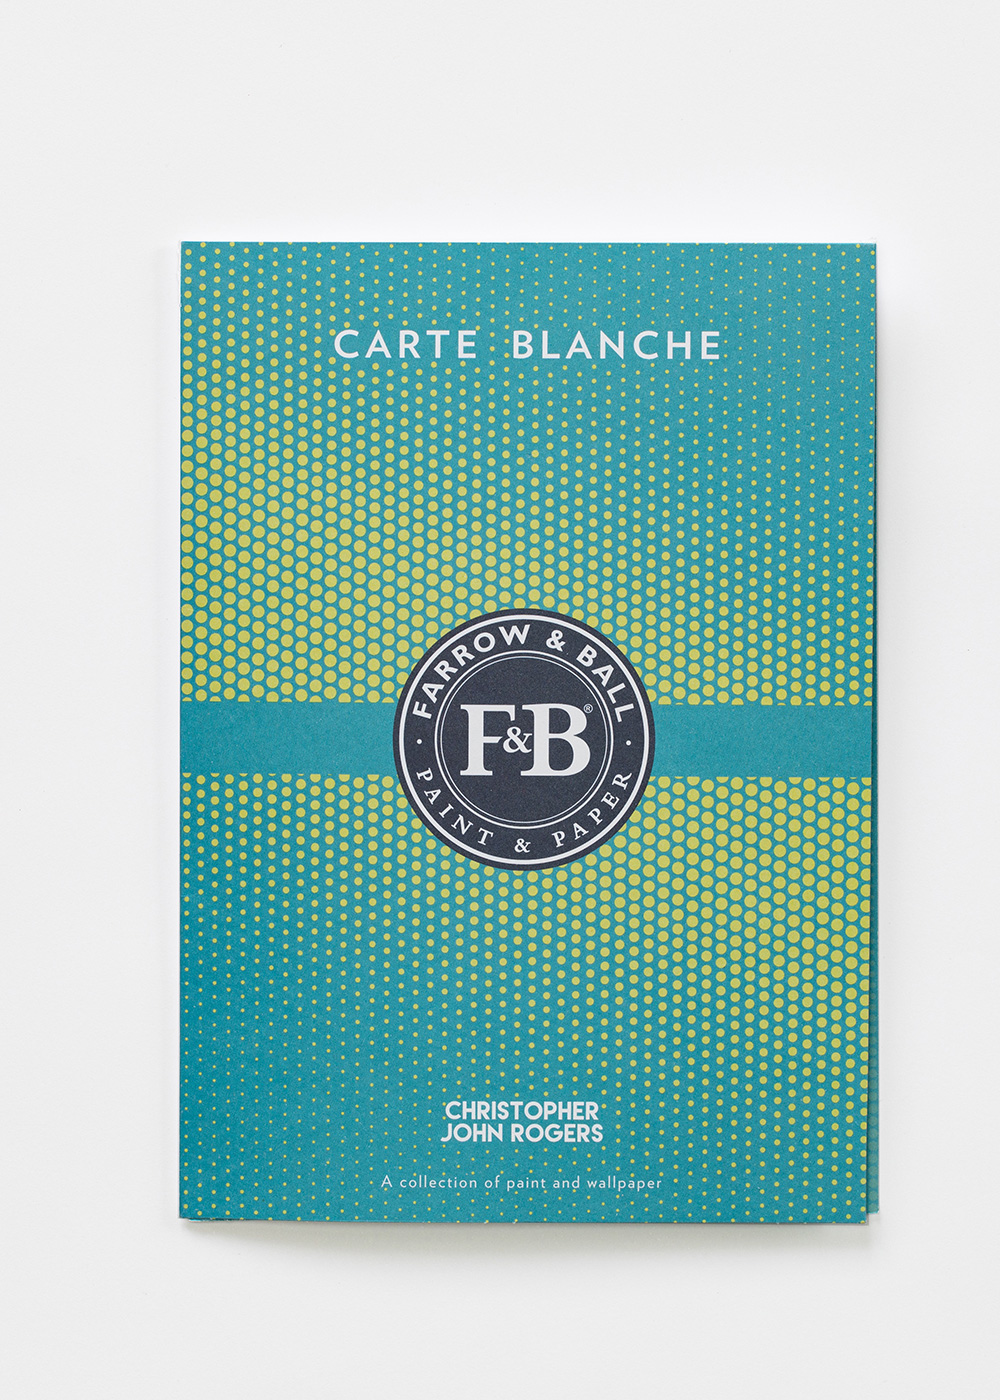 Couverture broche Collection carte Blanche Farrow and Ball by Christopher John Rogers